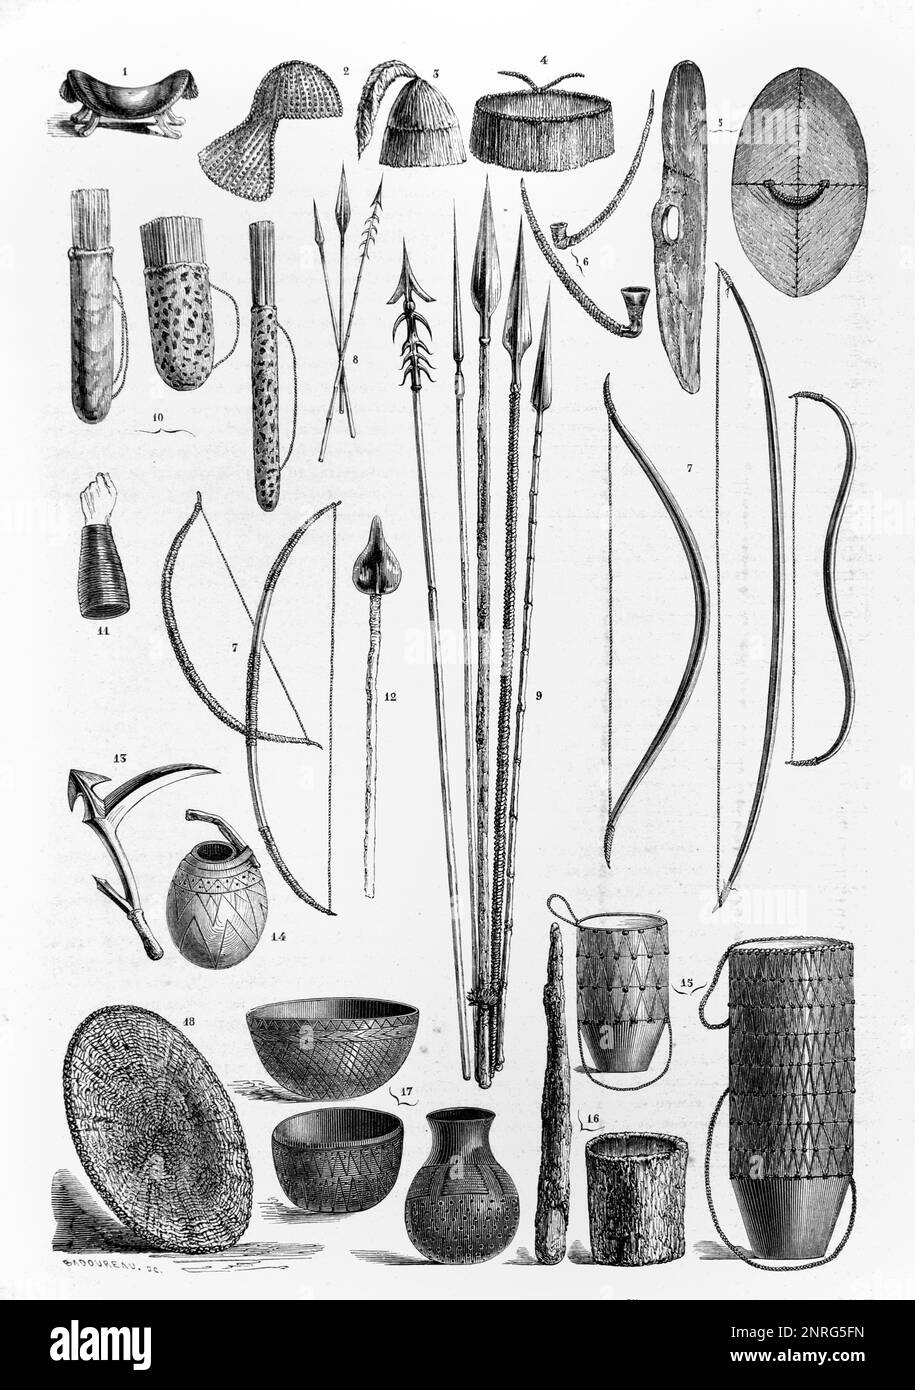 Display of Weapons, Spears, Bows & Arrows, Pottery, Musical Instruments and Kitchen Utensils Used by Tribes including the Nuer People Along the Bahr el Ghazal River in the White Nile Region of South Sudan. Vintage Engraving or Illustration 1862 Stock Photo